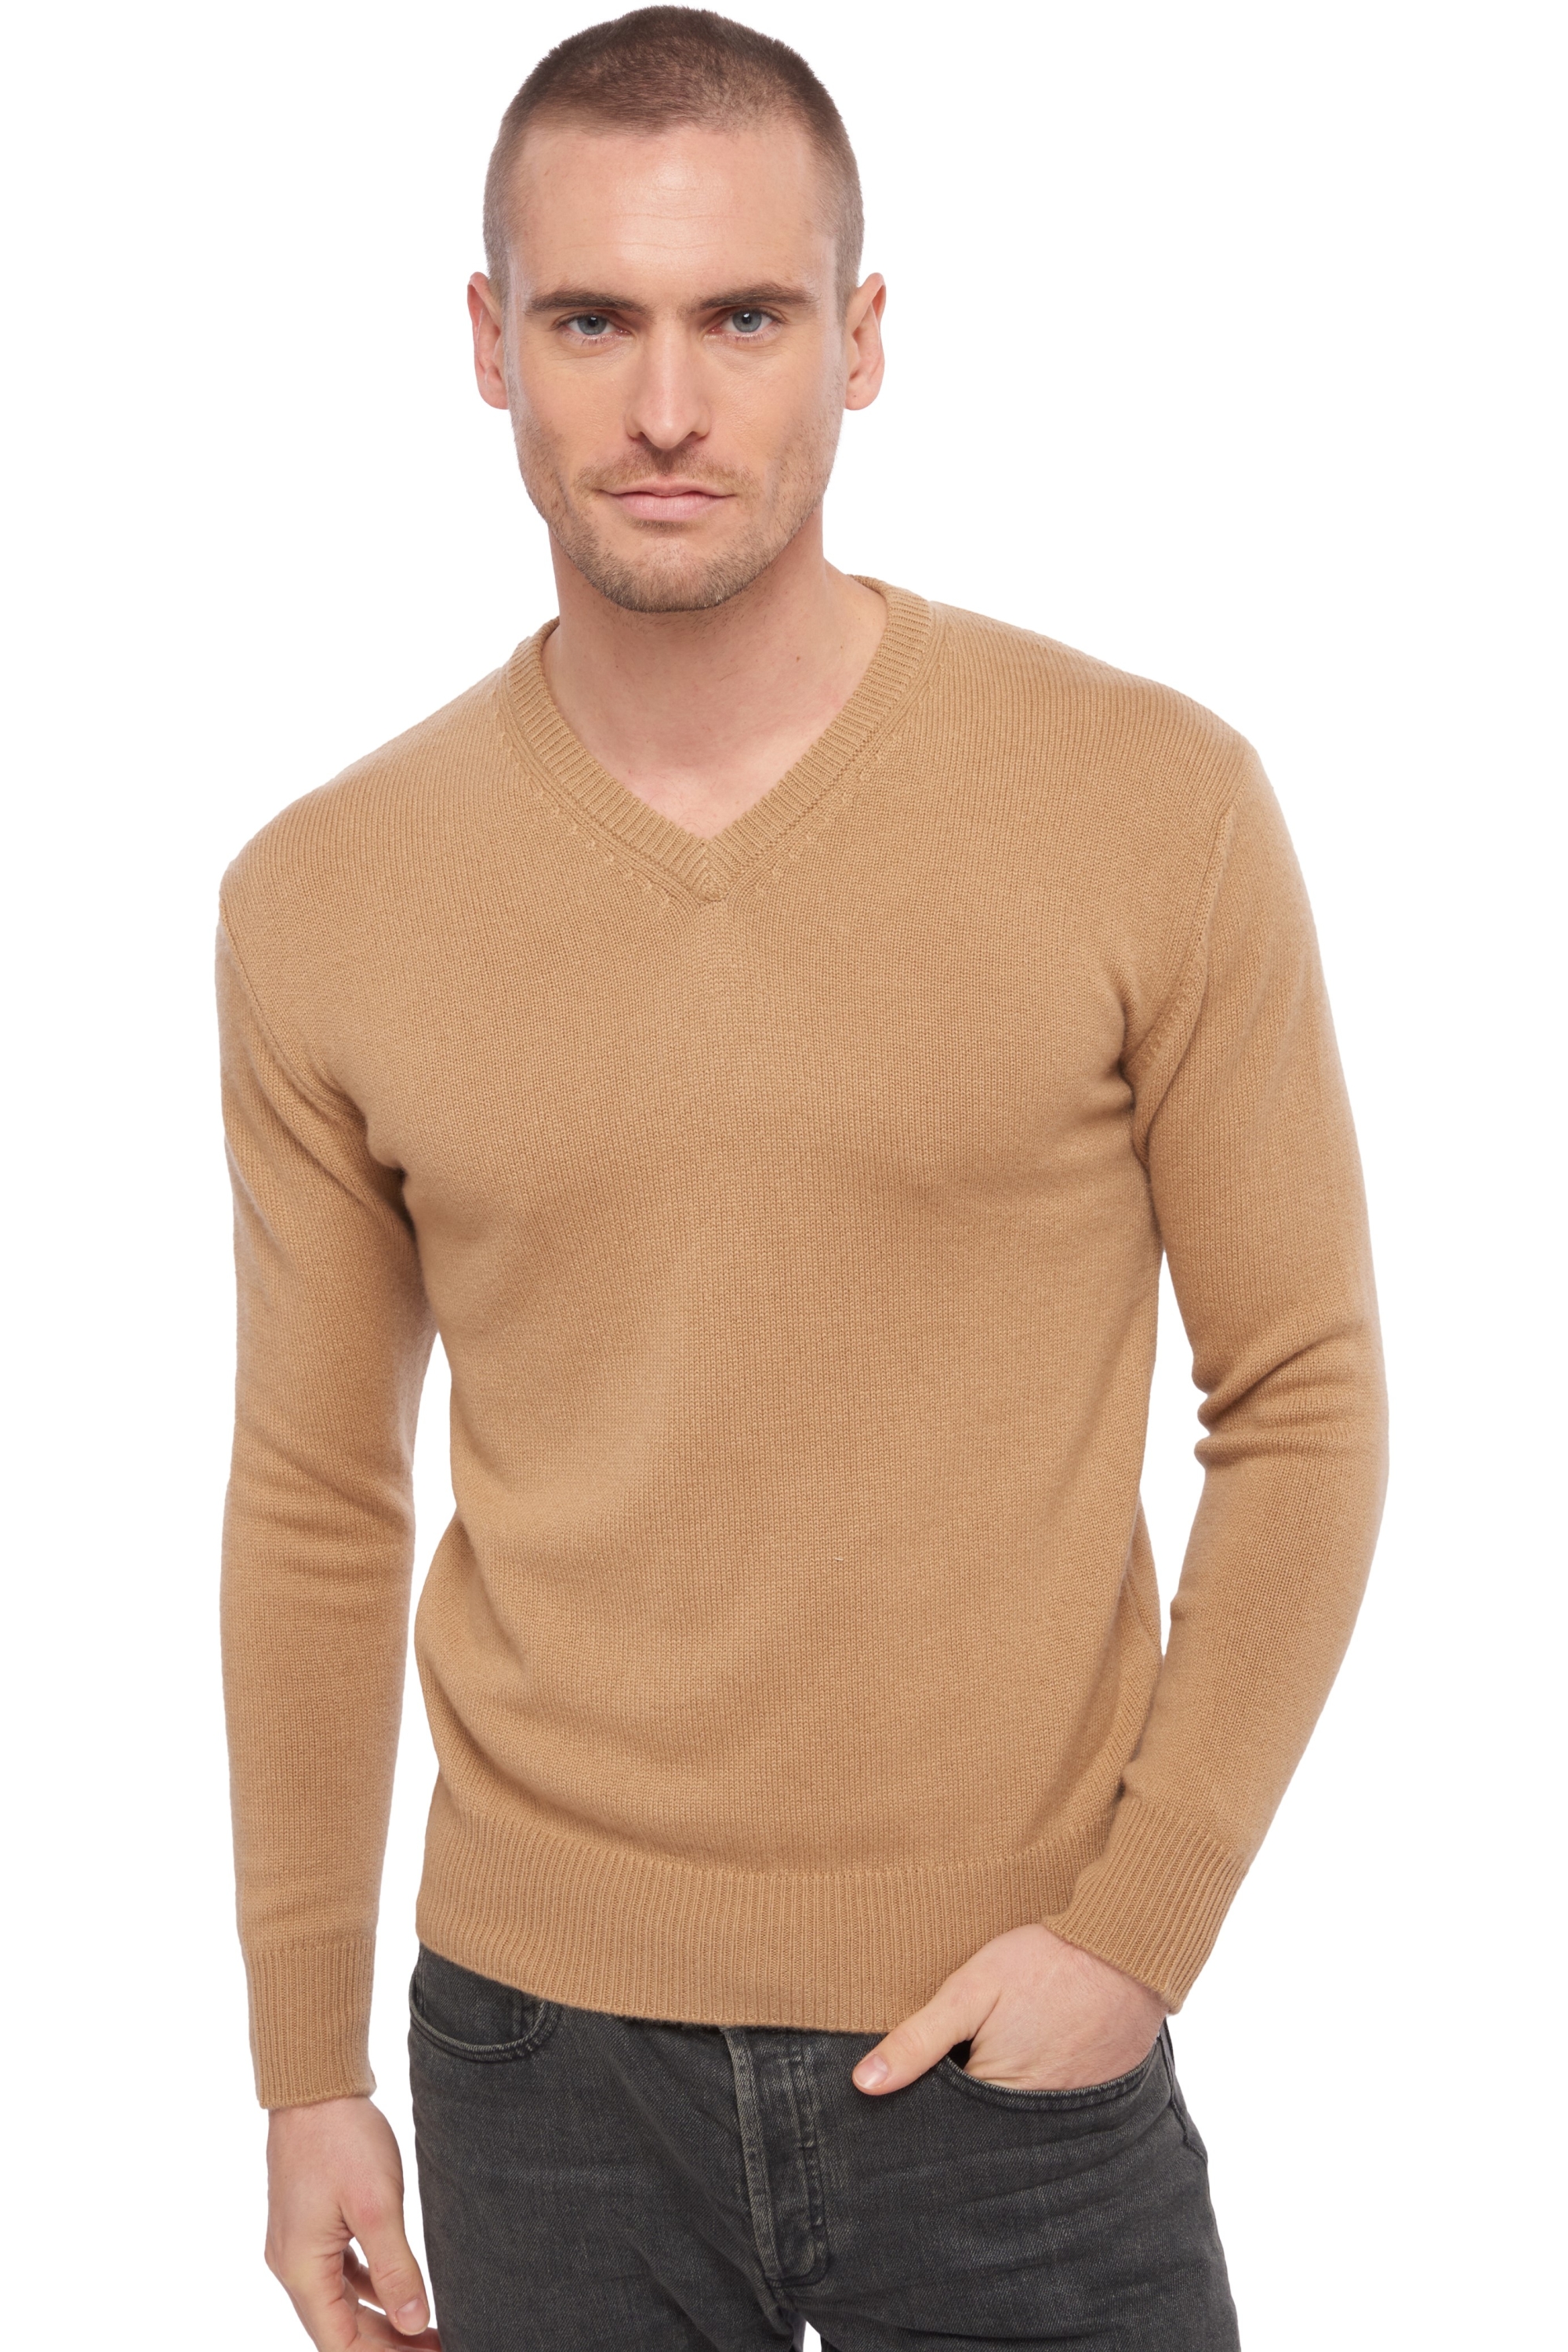 Cachemire pull homme hippolyte 4f camel 3xl